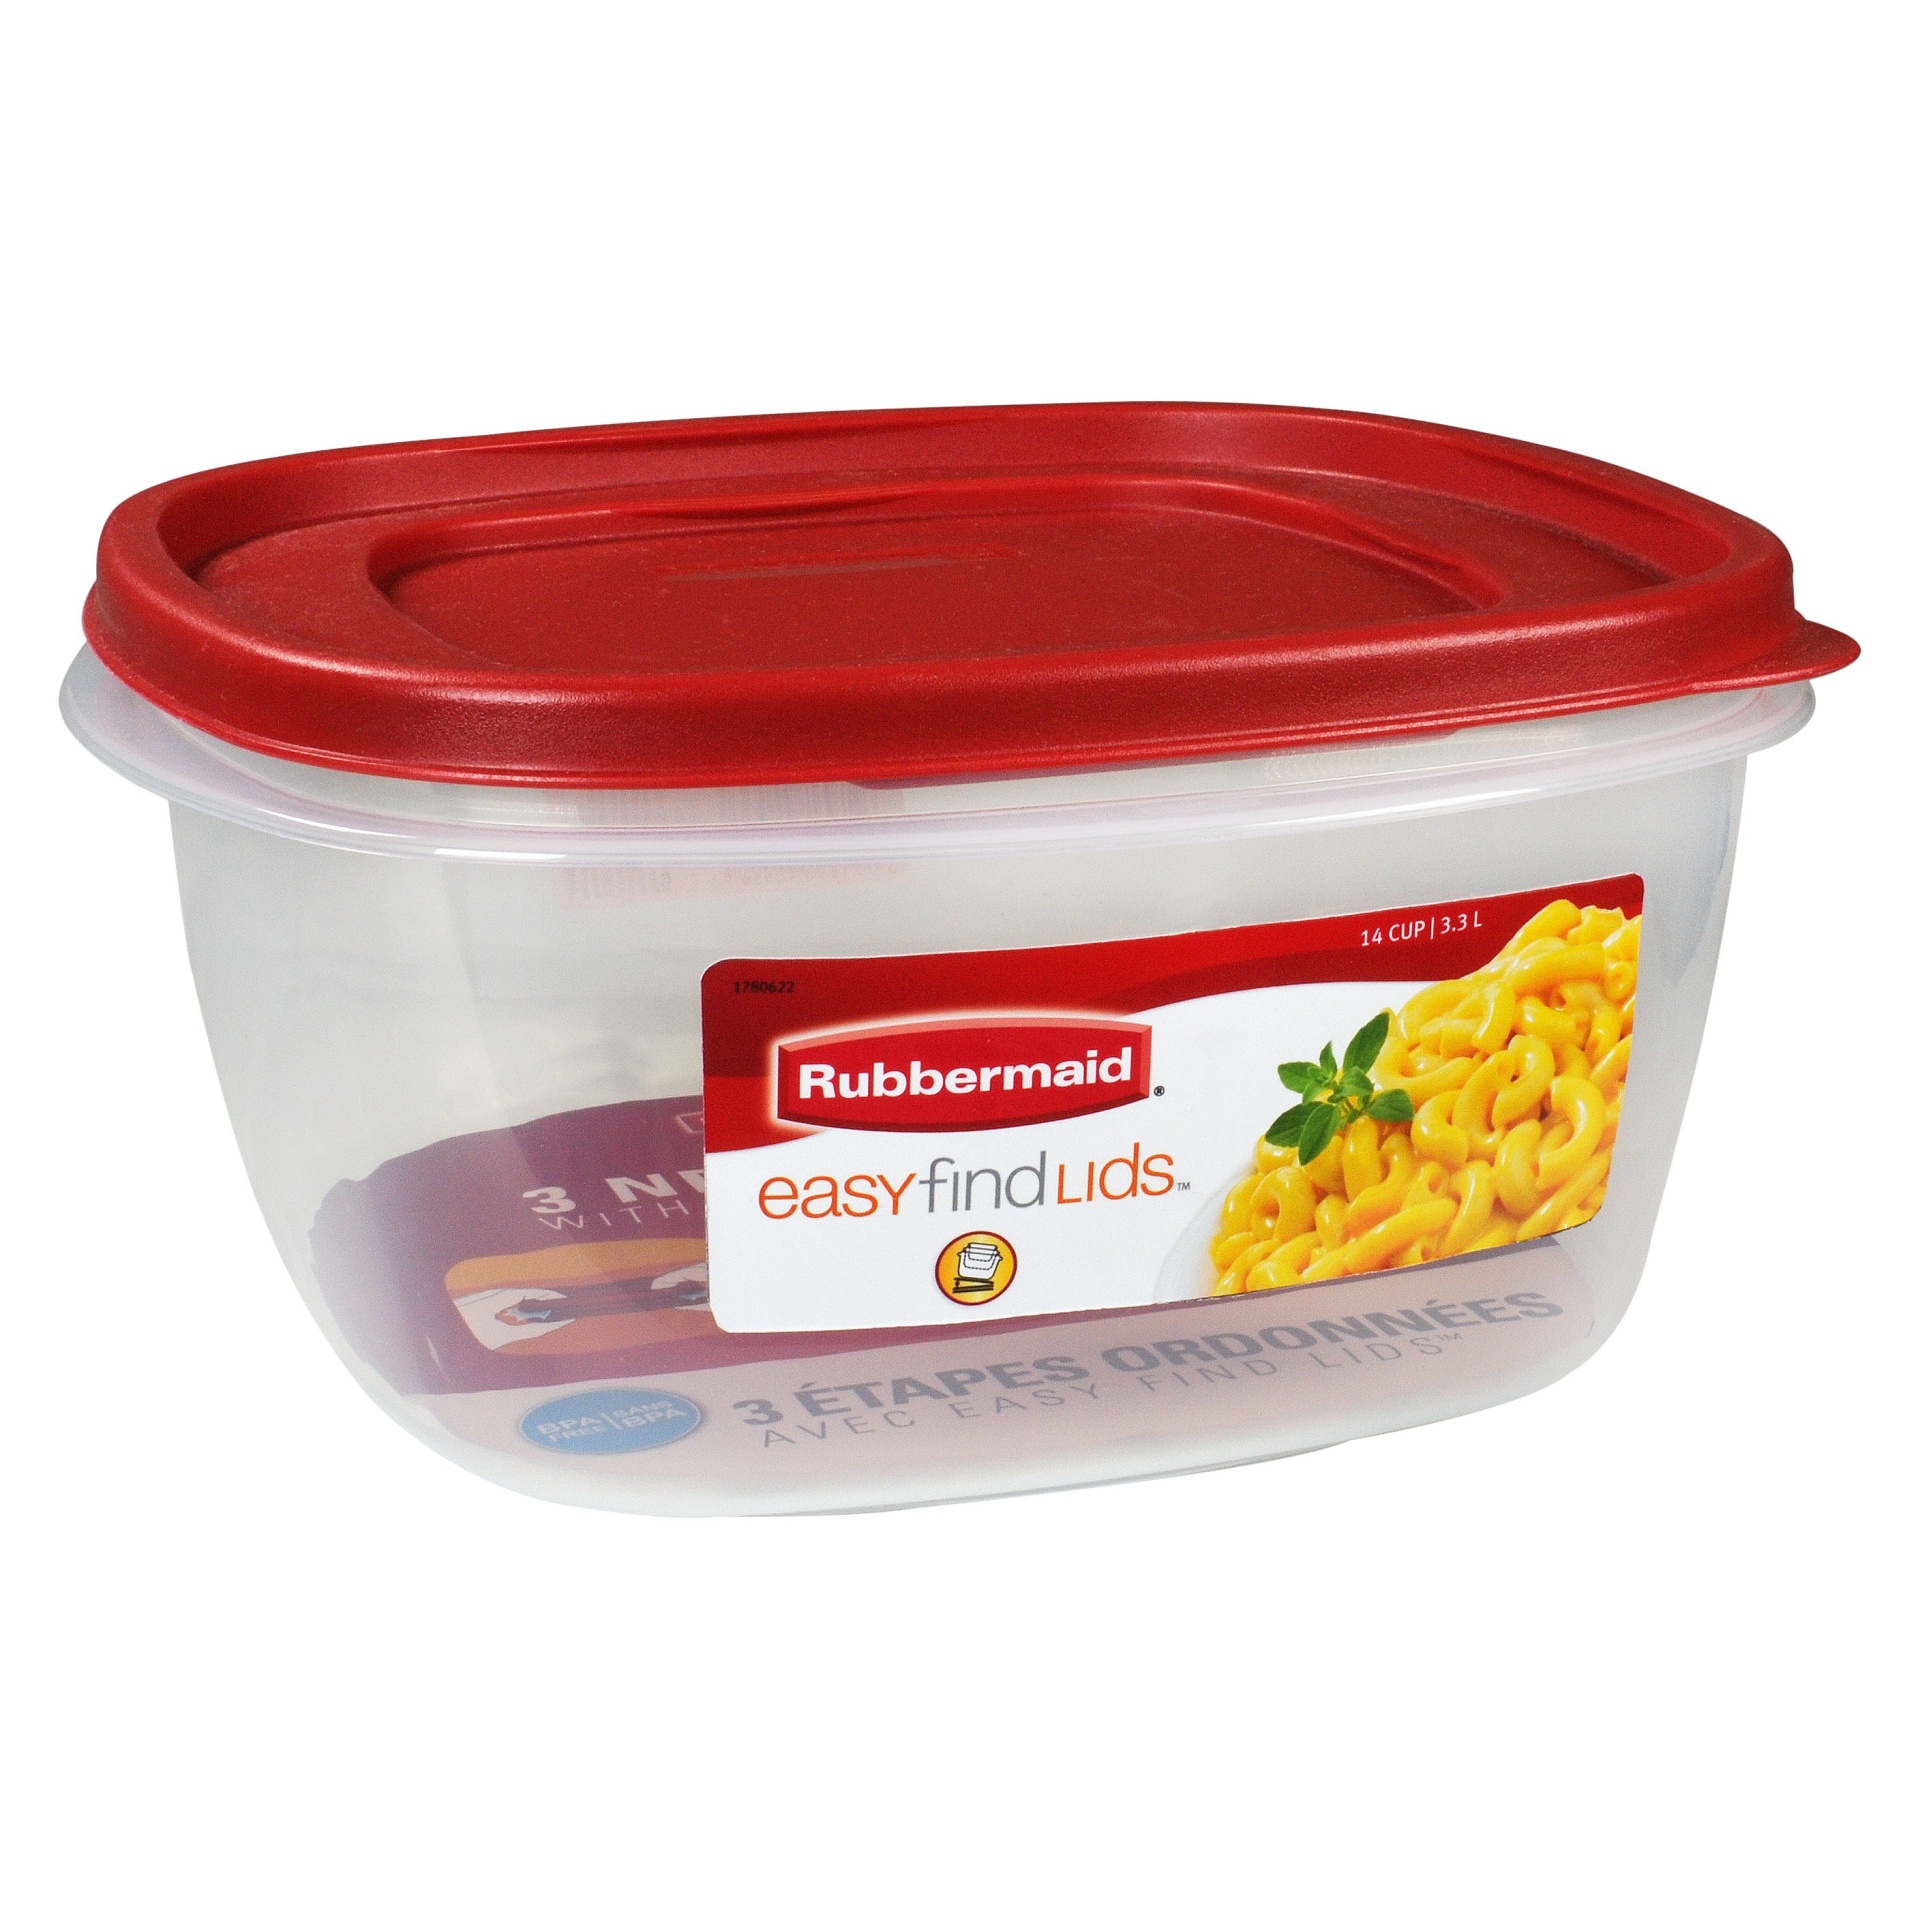 slide 1 of 2, Rubbermaid Easy Find Lids Container, 14 cup